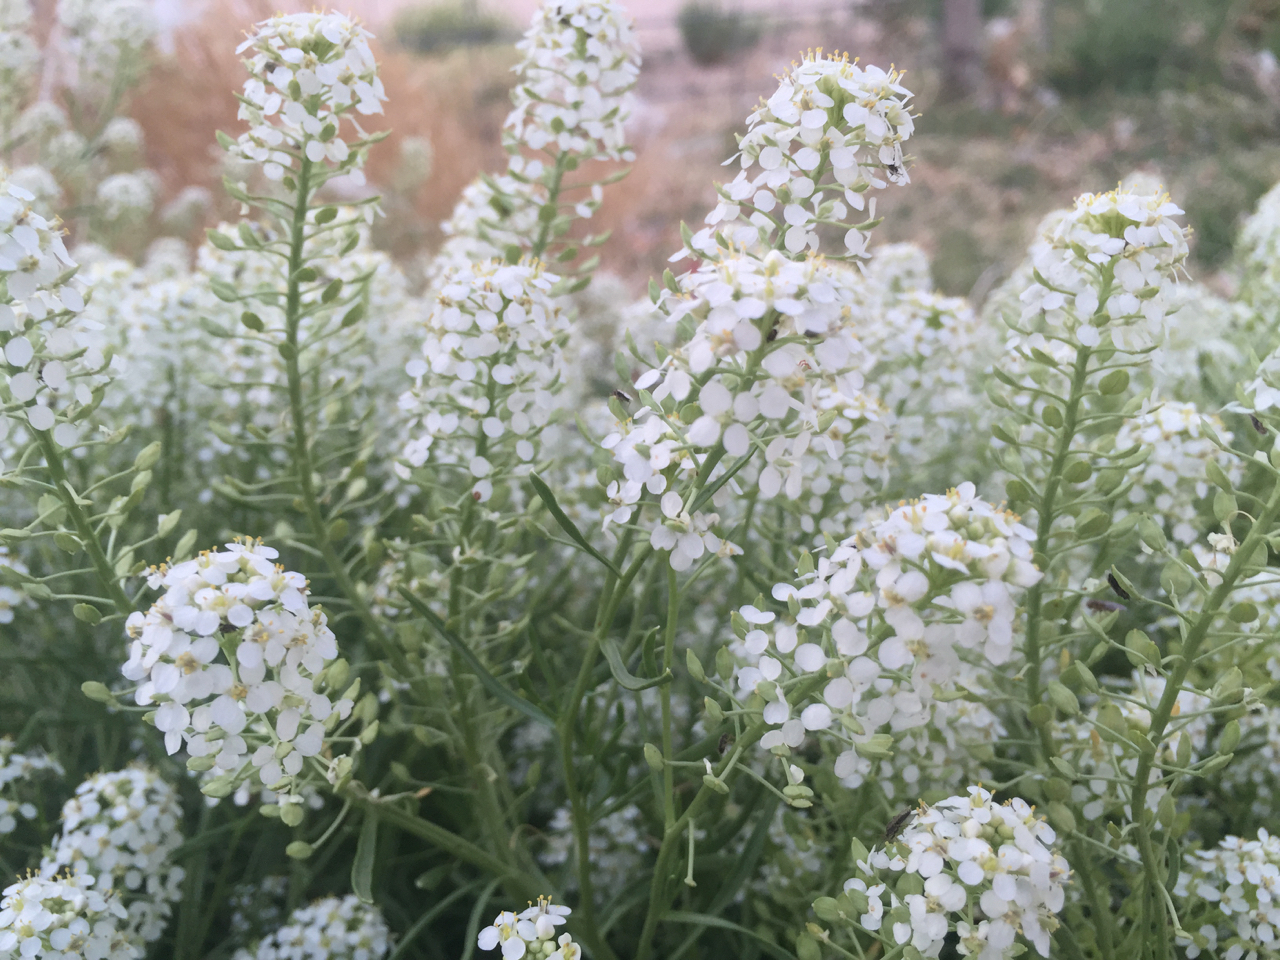 Close up of white flowered stems